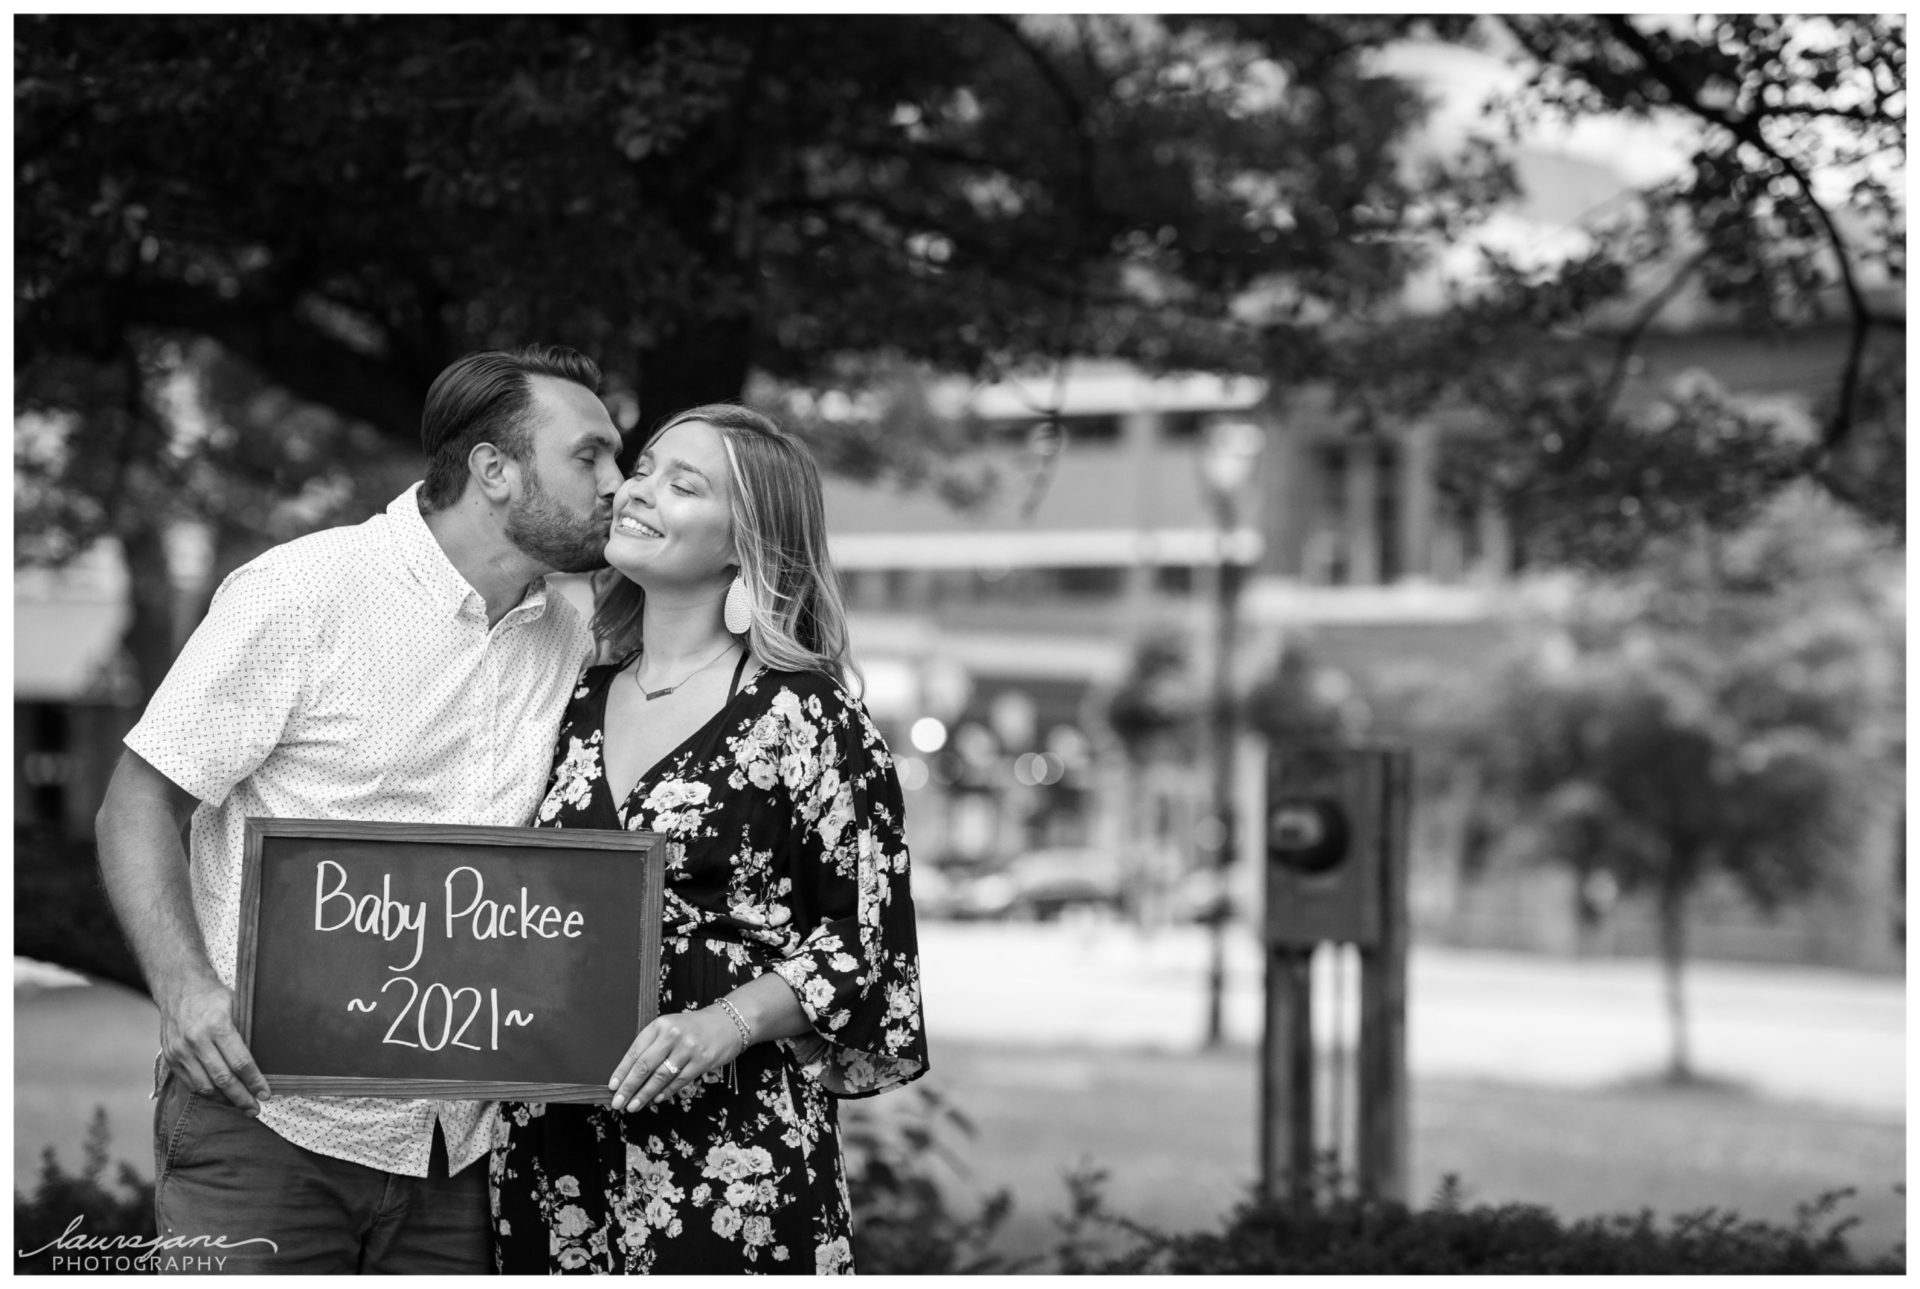 Baby announcement photos of Milwaukee couple by LauraJane Photography